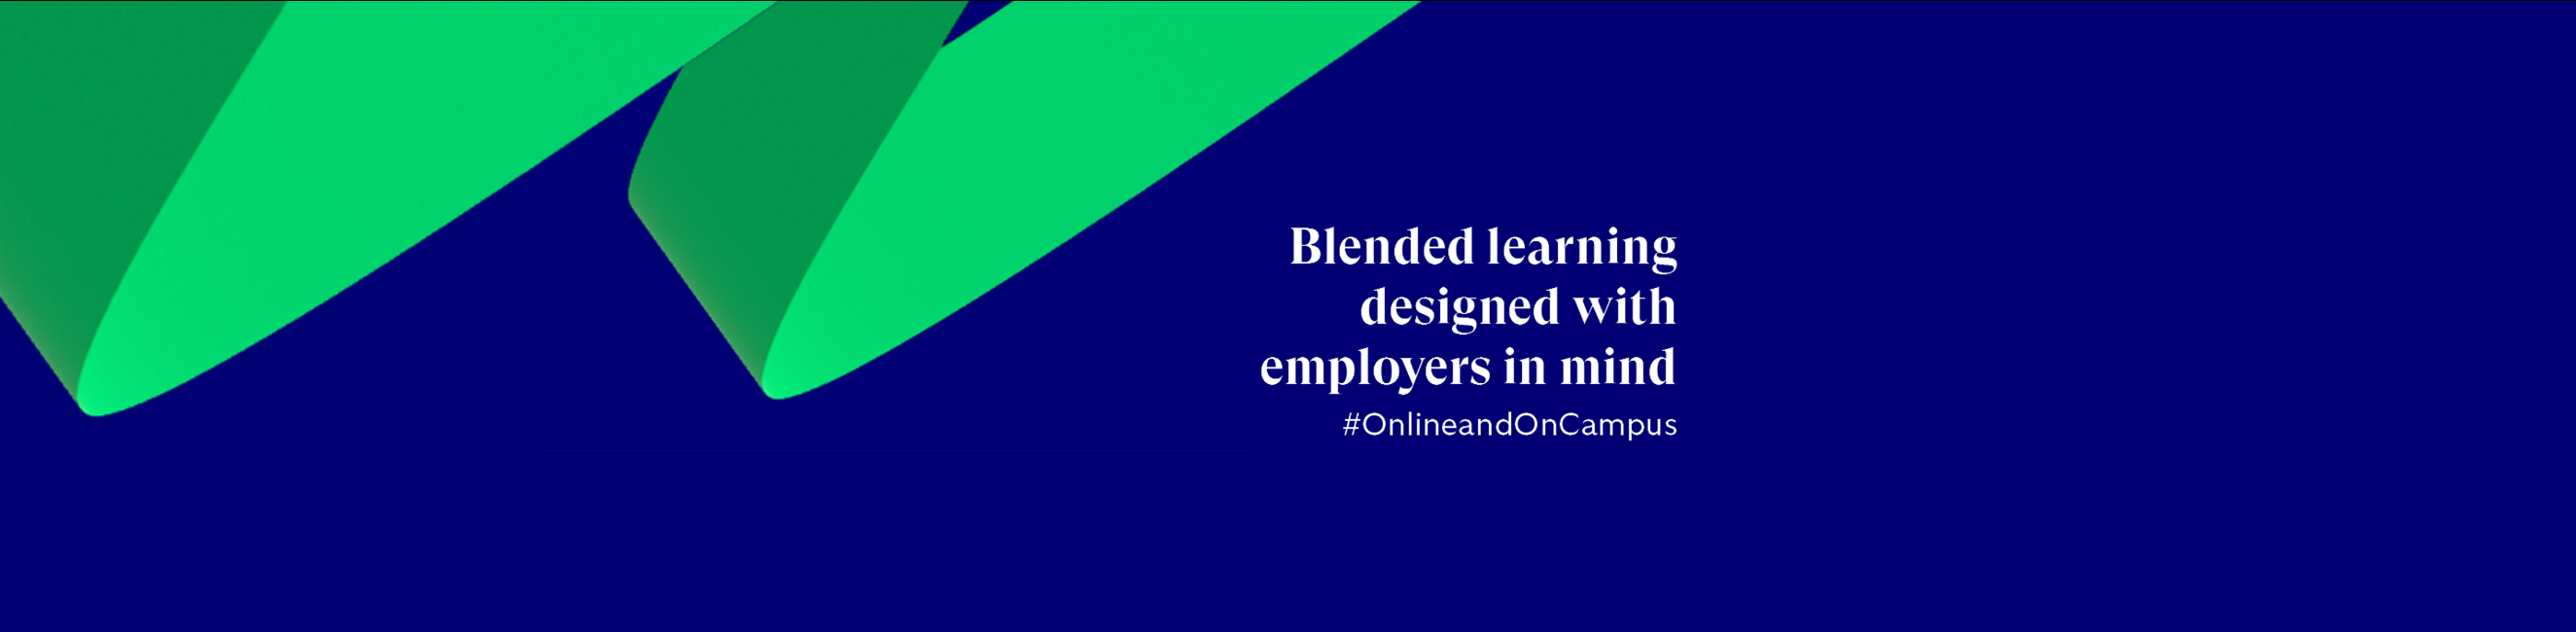 blended learning designed with employers in mind #onlineandoncampus